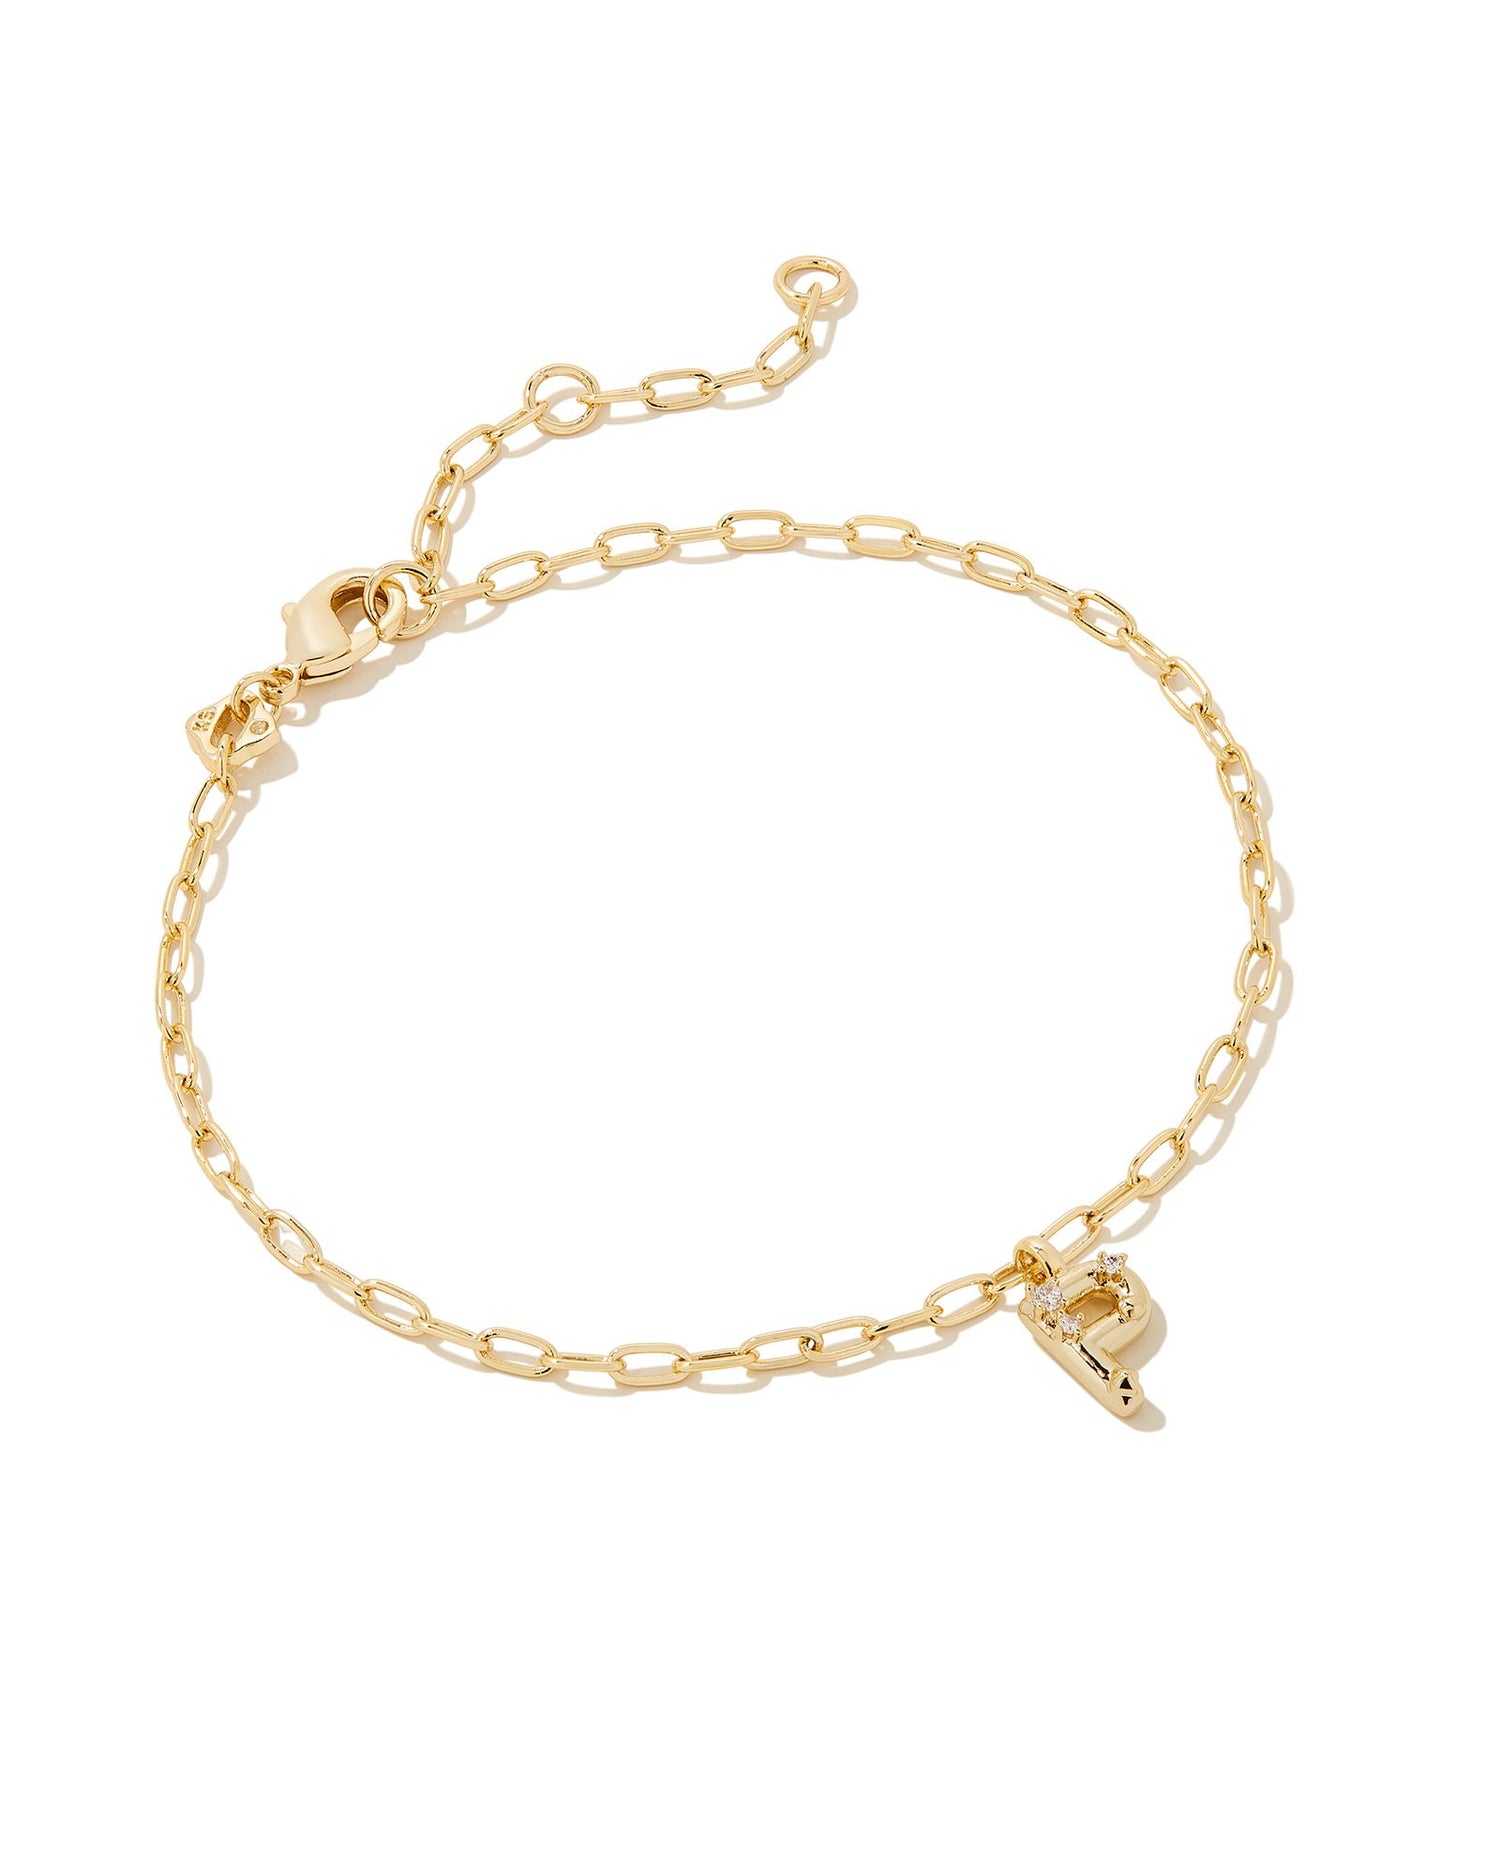 Add a personal touch to your wrist stack with the Crystal Delicate Chain Bracelet in White Crystal, our first Fashion Jewelry initial bracelet. Featuring a dainty chain and letter charm with a hint of sparkle, this bracelet is the perfect way to celebrate the ones you love—including yourself!  Dimensions- 6.5' CHAIN WITH 1.5' EXTENDER, 0.45'L X 0.26"W PENDANT Metal- 14K Gold plated over brass Closure- Lobster Clasp Material-  White CZ Letter P